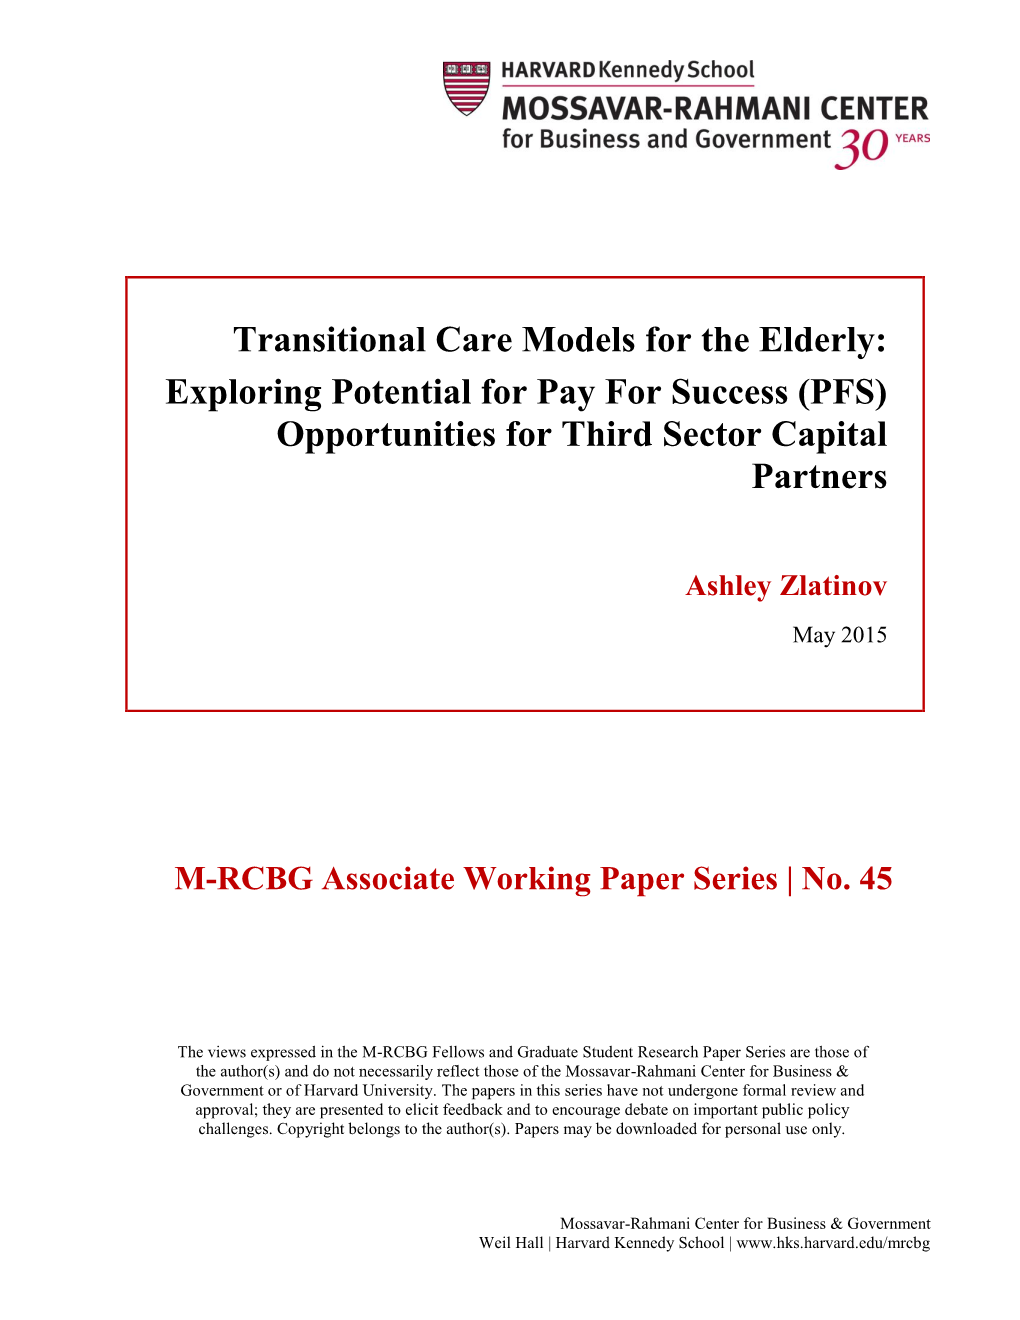 Transitional Care Models for the Elderly: Exploring Potential for Pay for Success (PFS) Opportunities for Third Sector Capital Partners